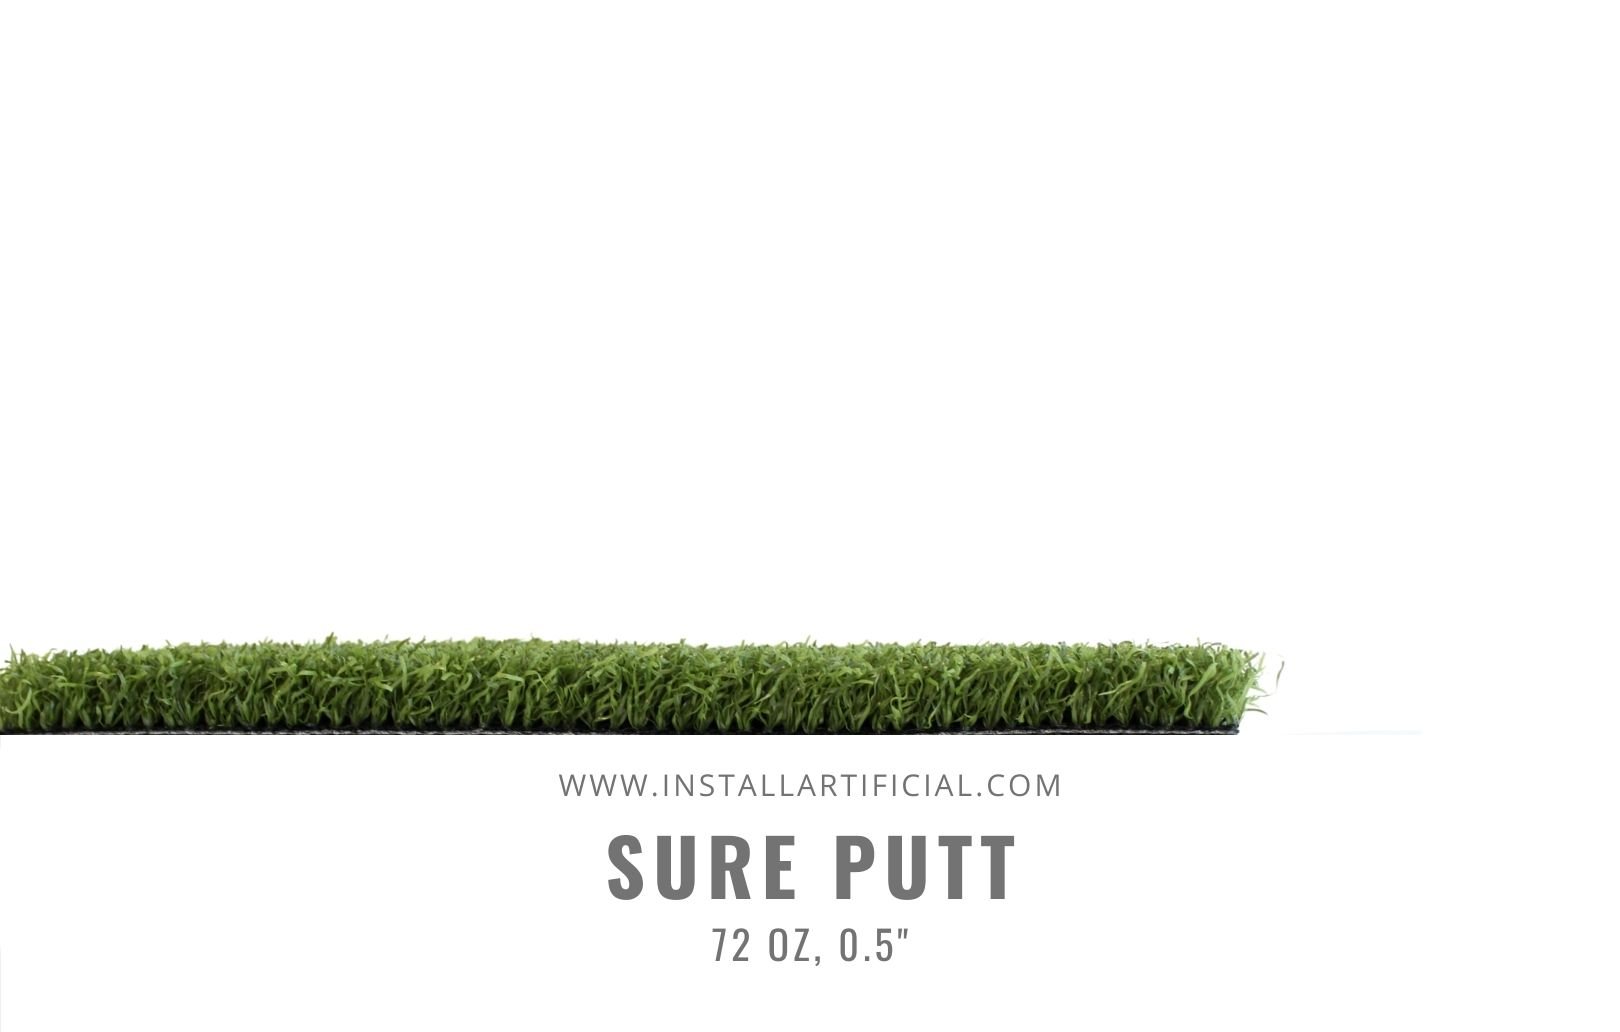 Sure Putt, Synthetic Grass Warehouse, Tiger Turf, side